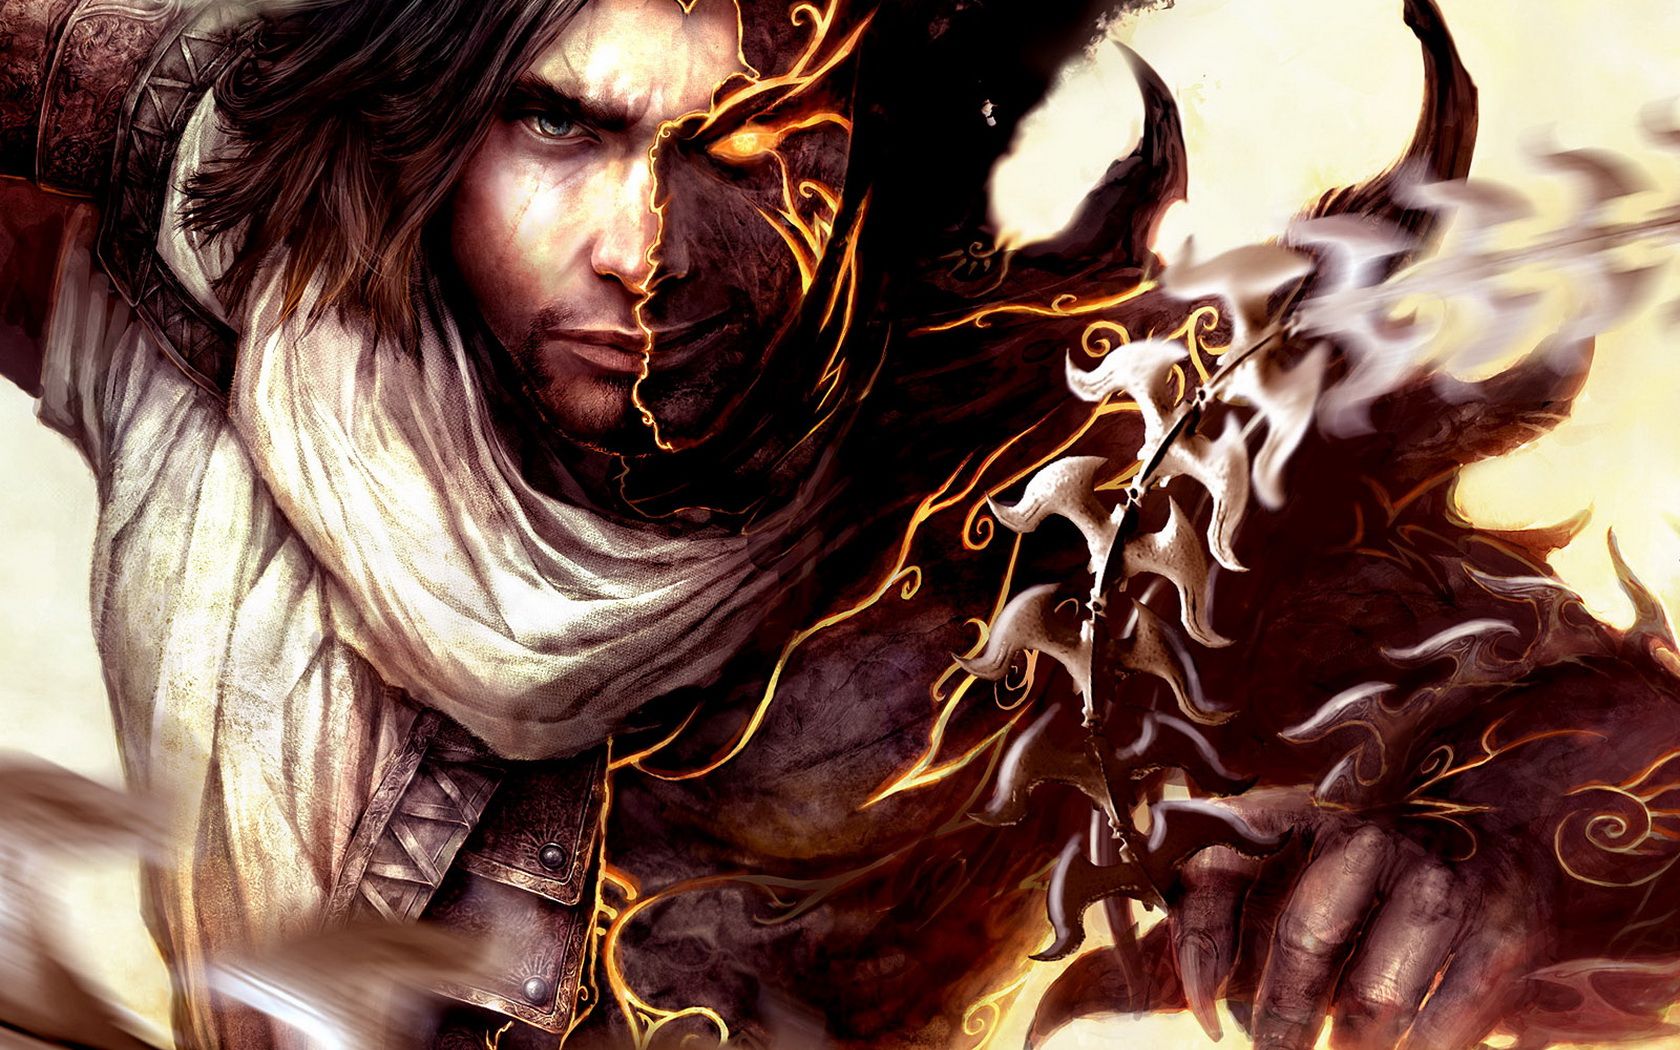 prince of persia, prince of persia: the two thrones, video game